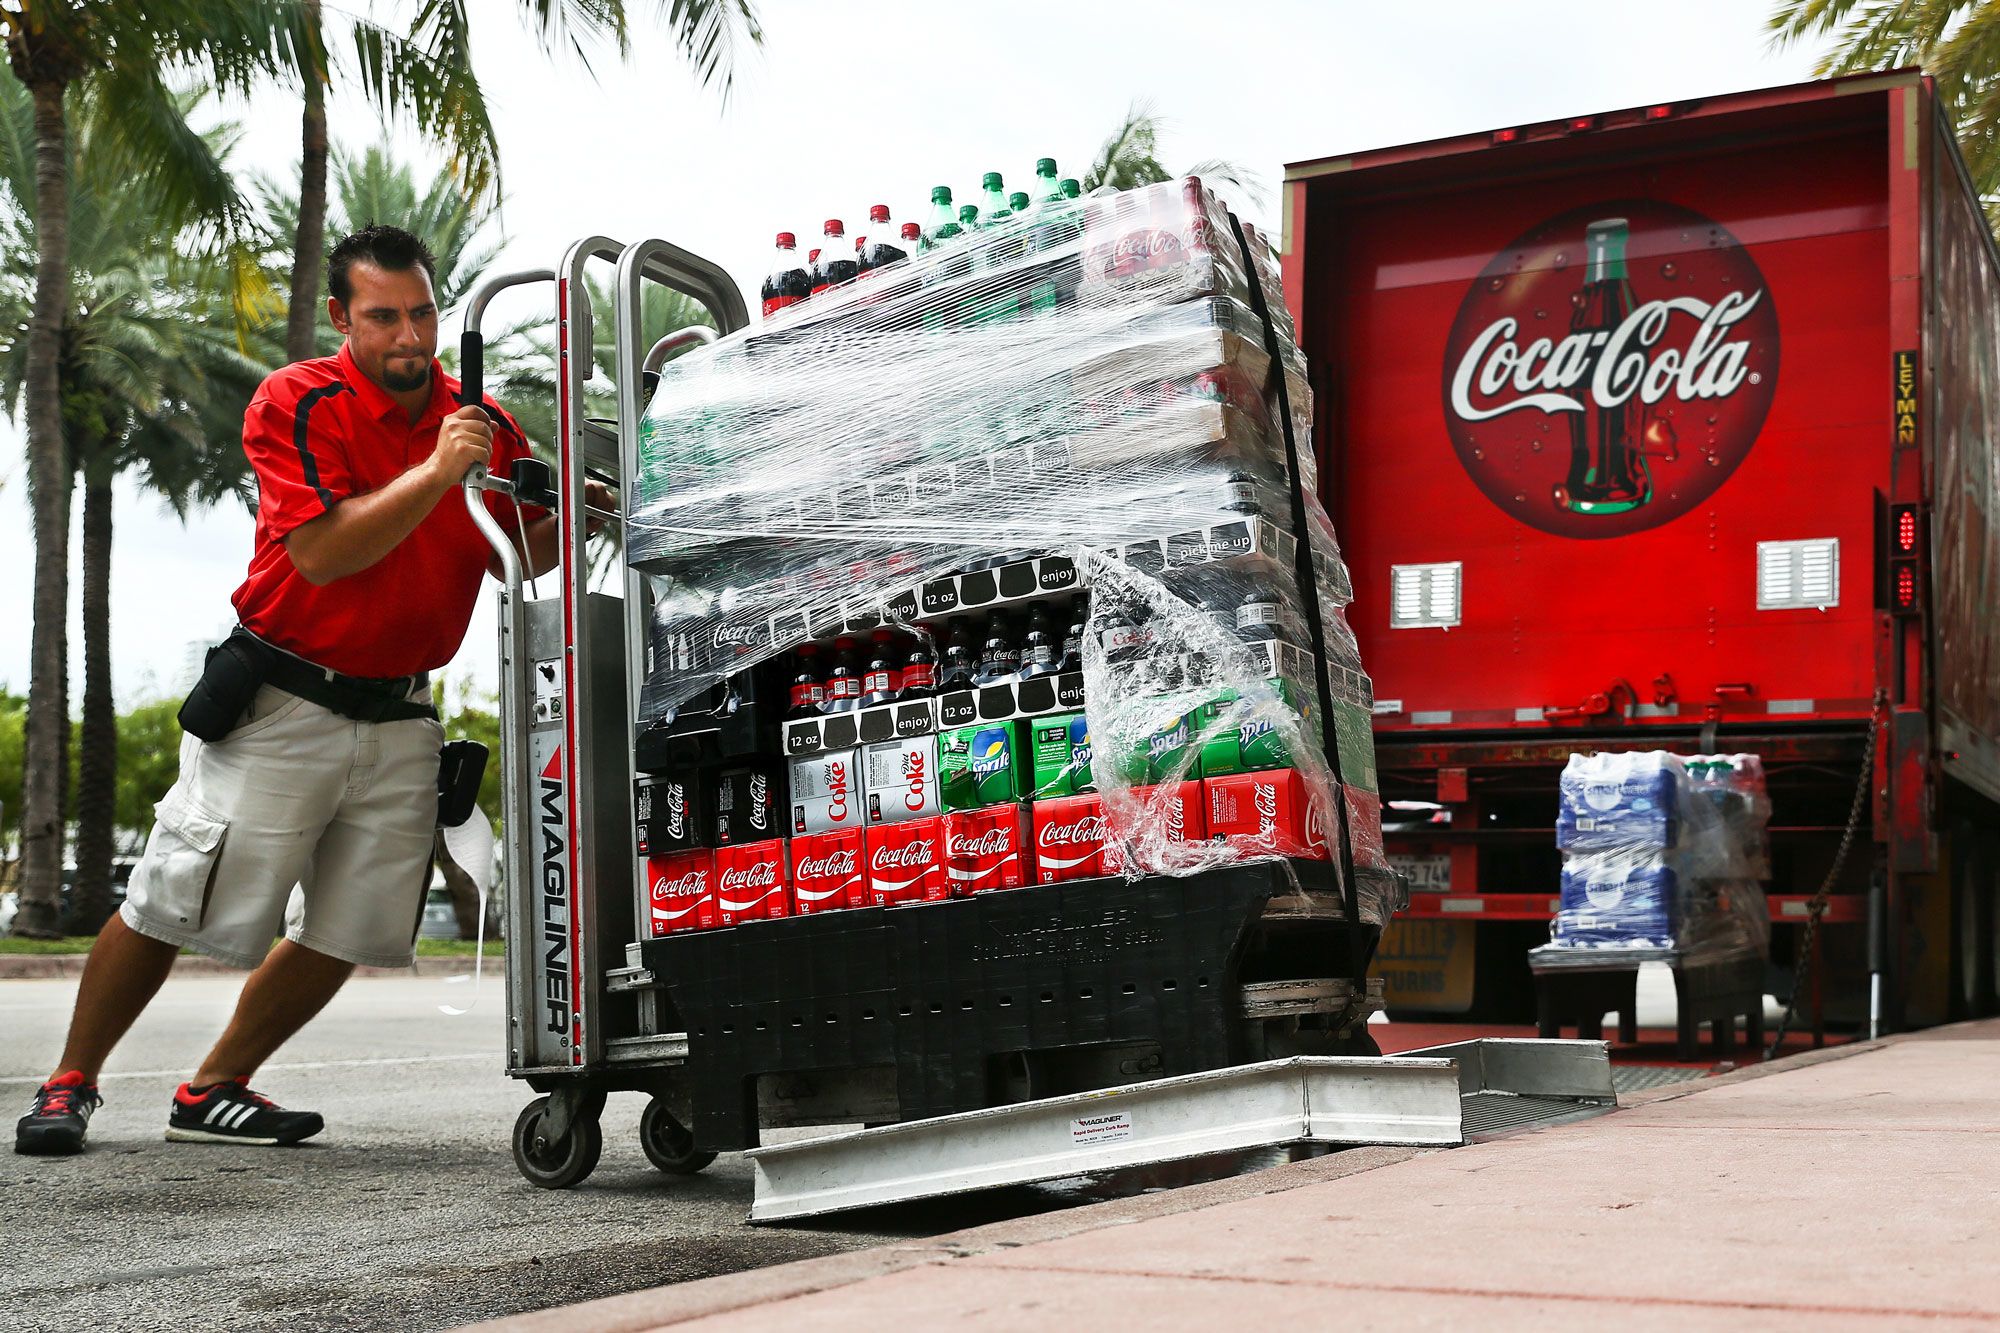 Coca-Cola has room to run in a market reminiscent of the 1980s